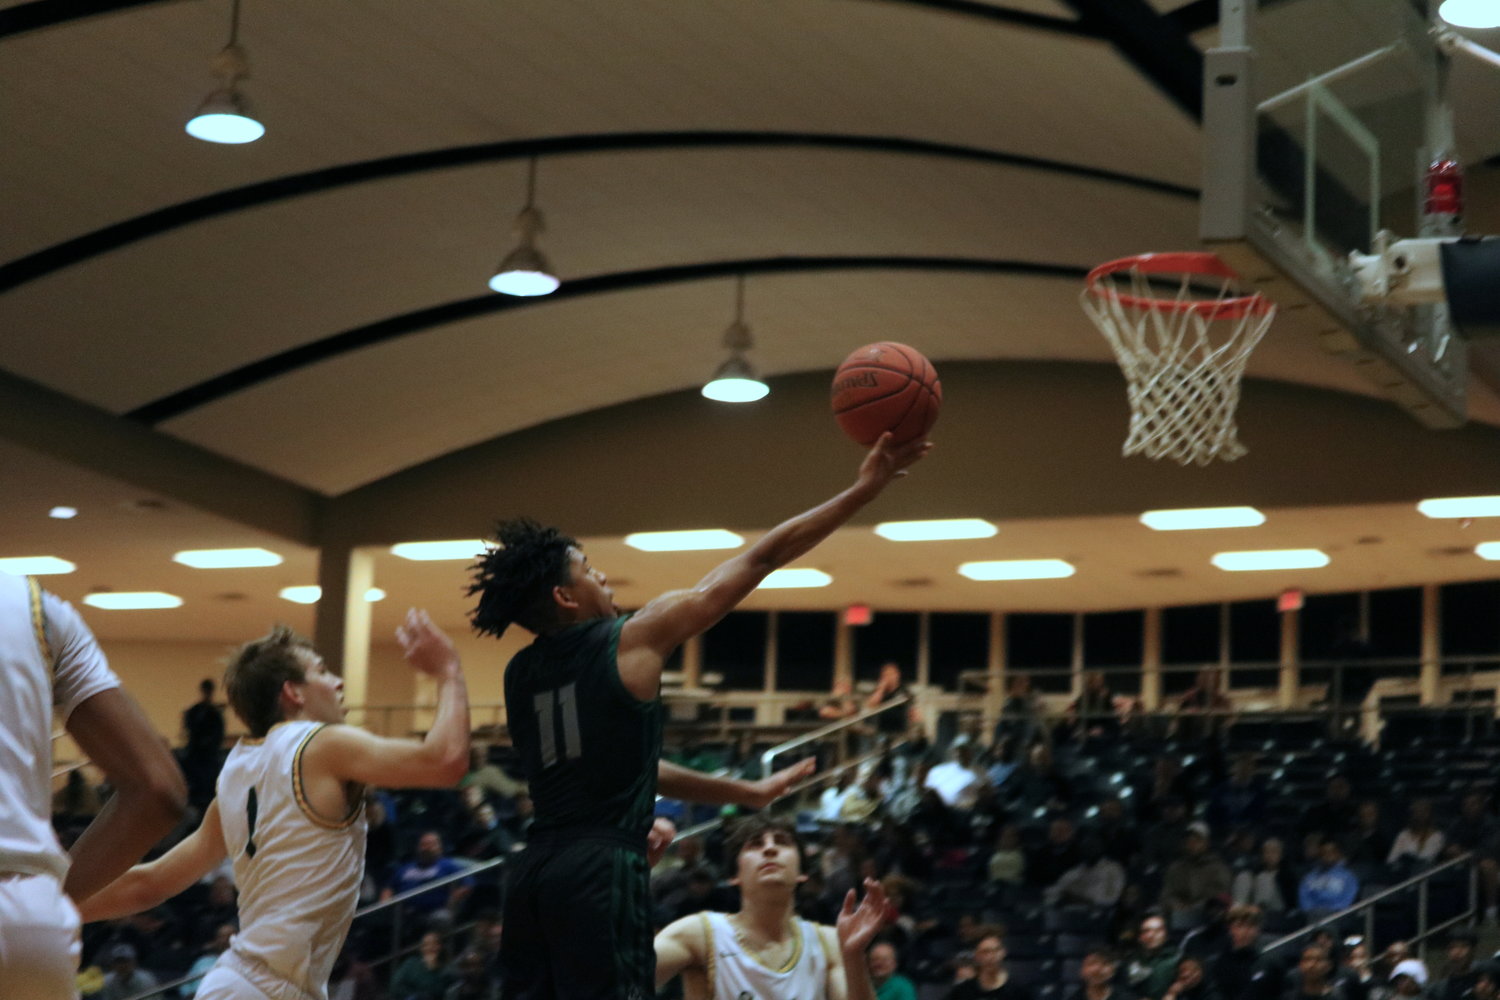 Larison Lamette shoots a layup during Friday’s game between Mayde Creek and Stratford at the Coleman Coliseum.